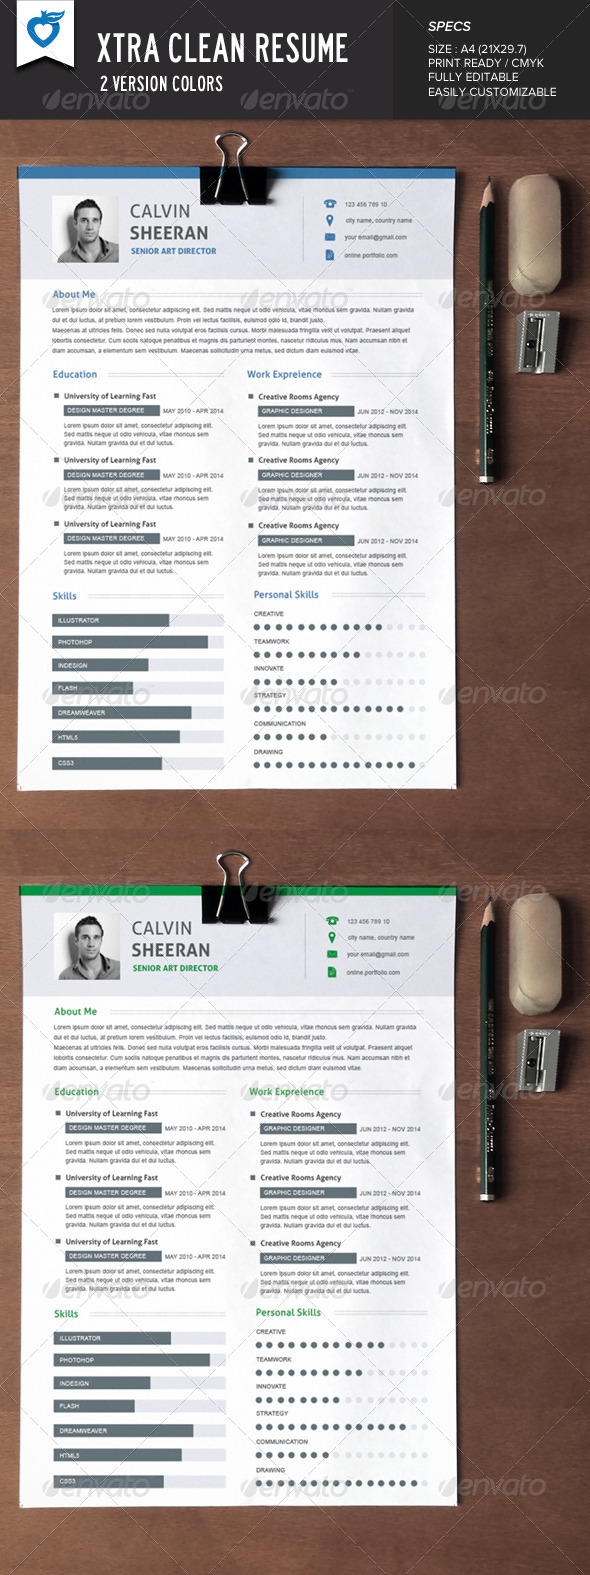 Xtra Clean Resume (Resumes)